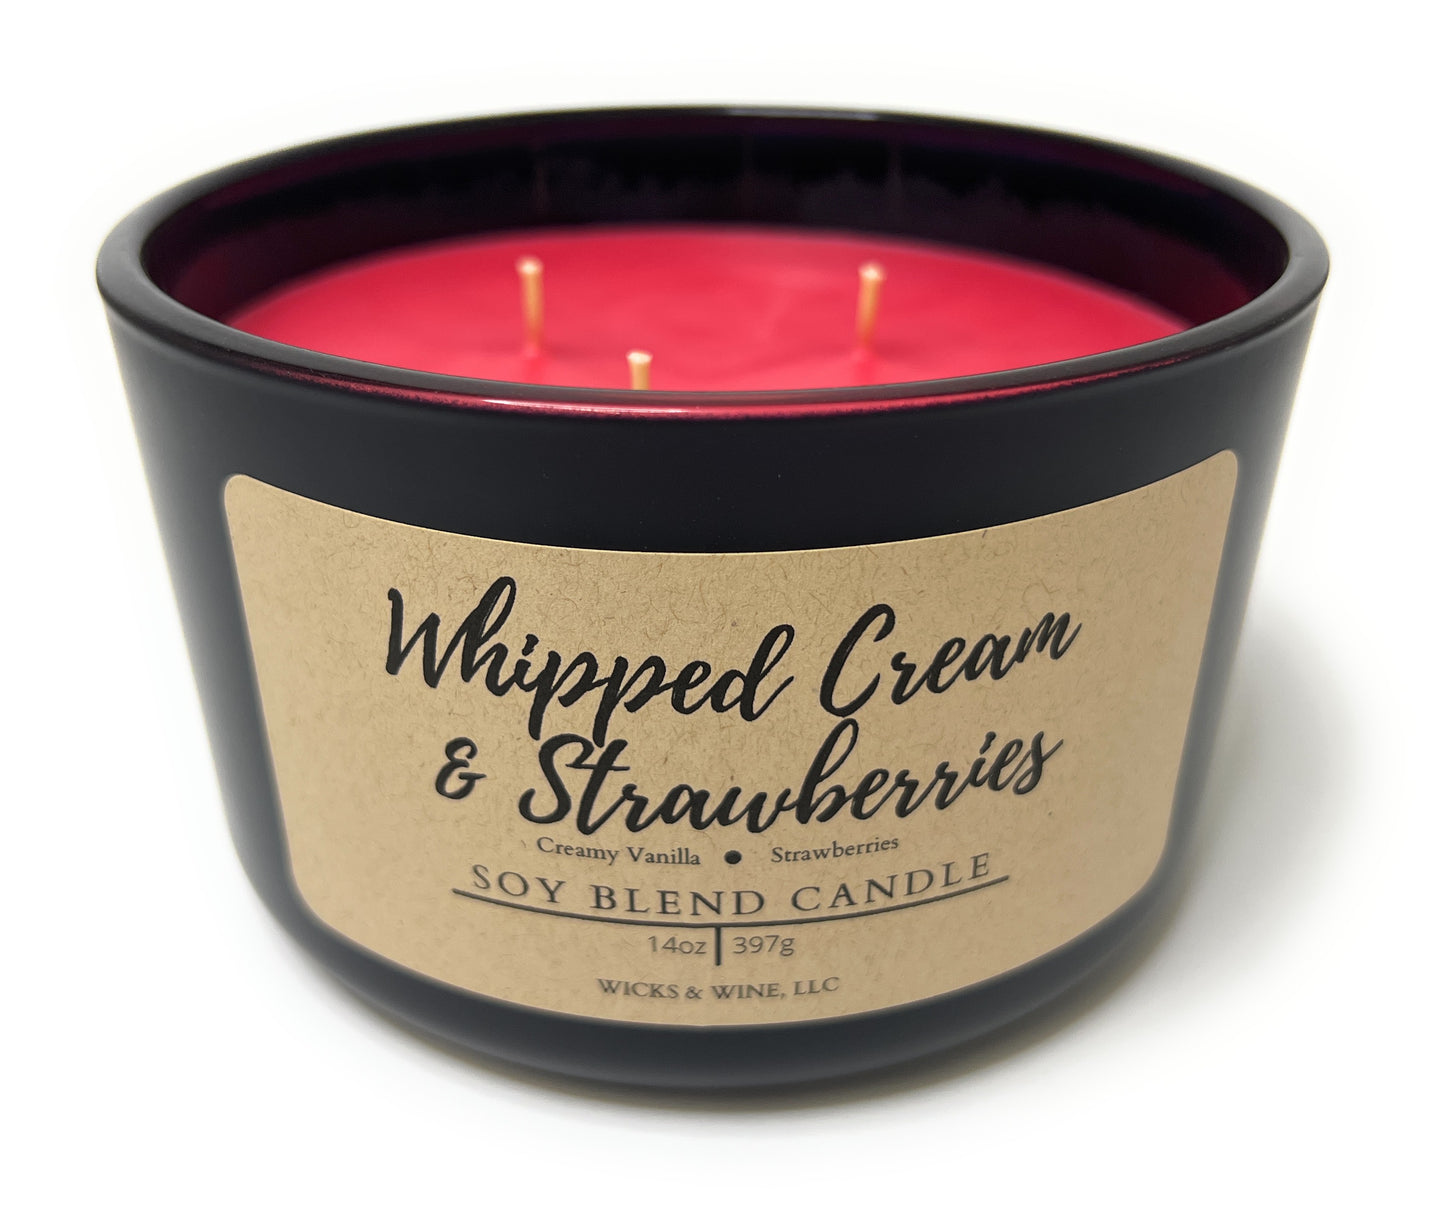 Whipped Cream & Strawberries 3 Wick Candle